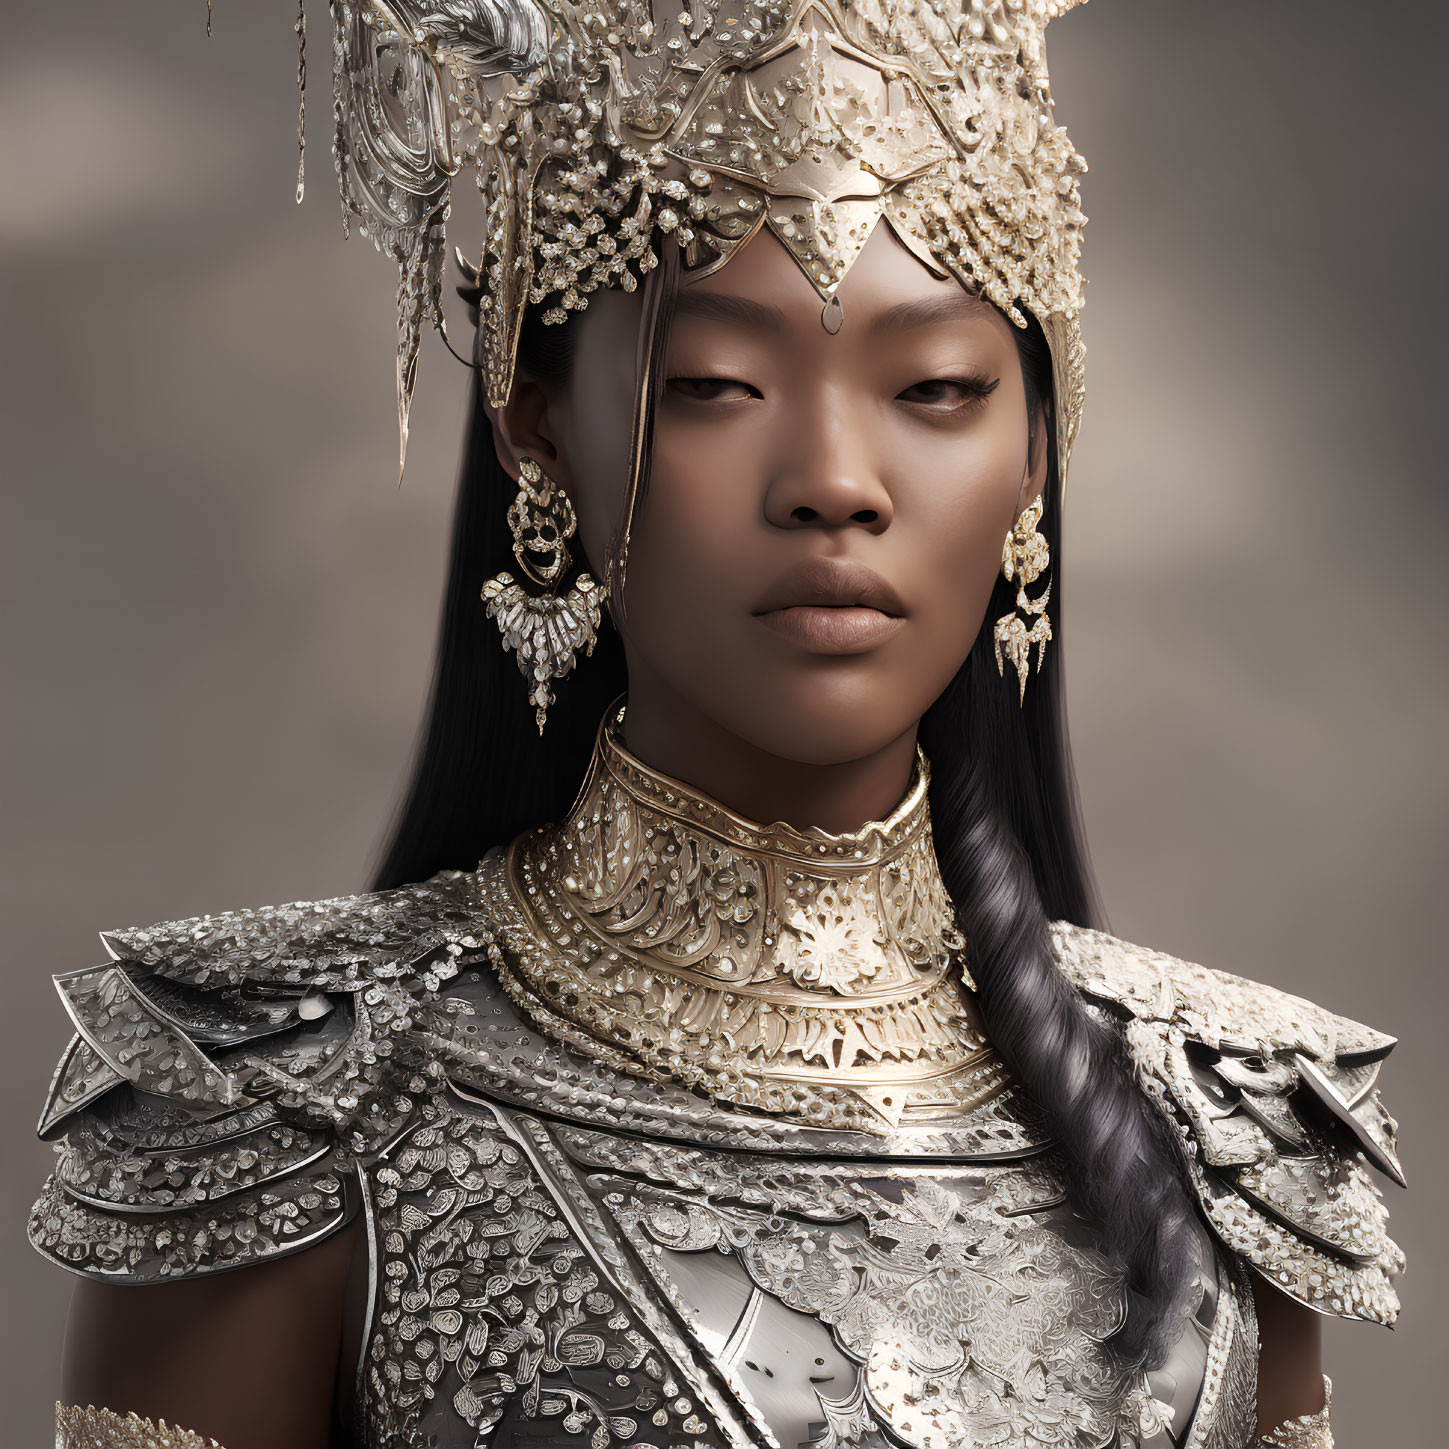 Serene woman in ornate silver and gold headdress and armor